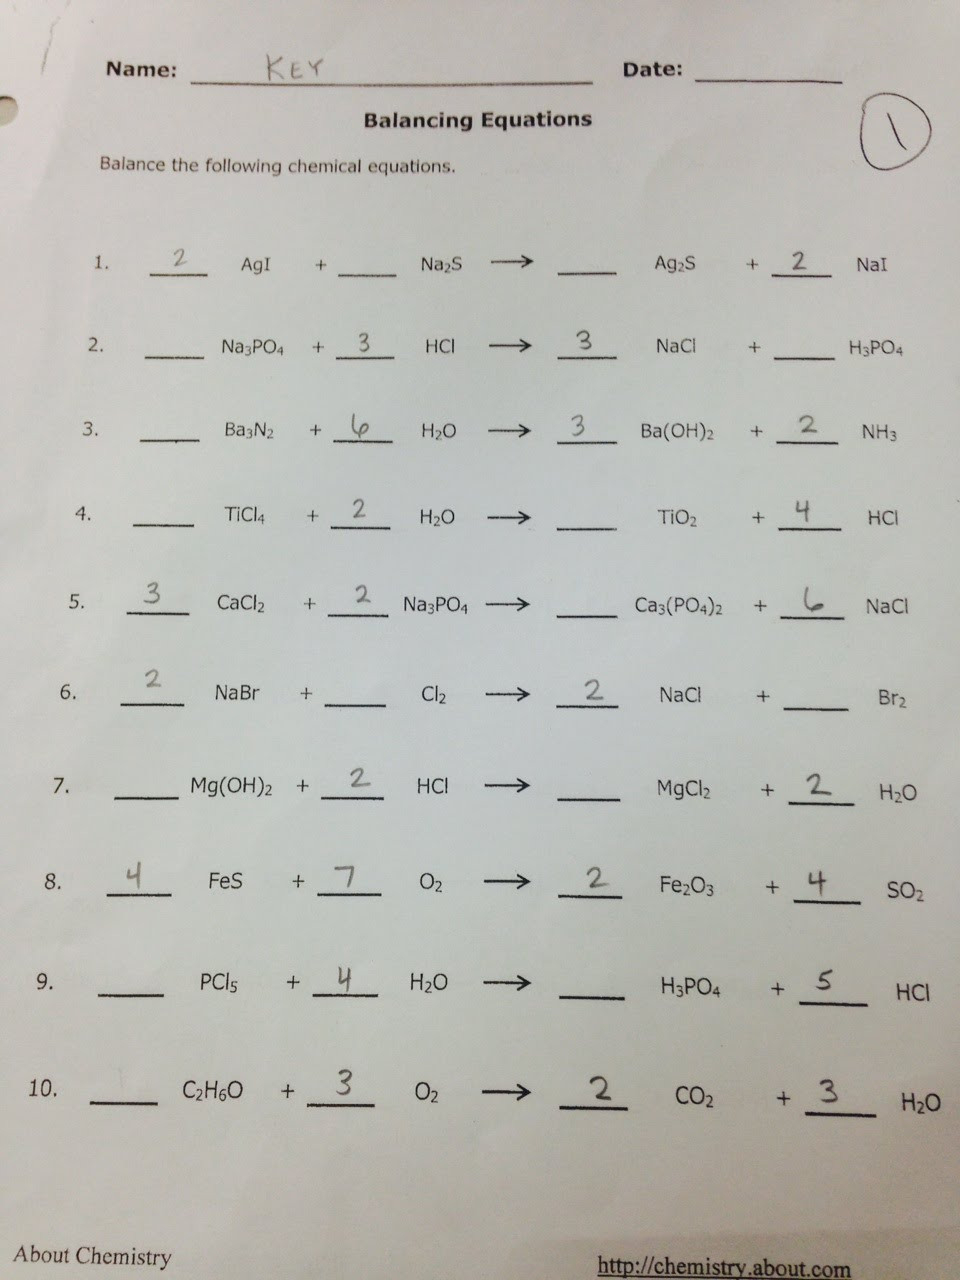 Physical Science If8767 Worksheet Answers — db-excel.com